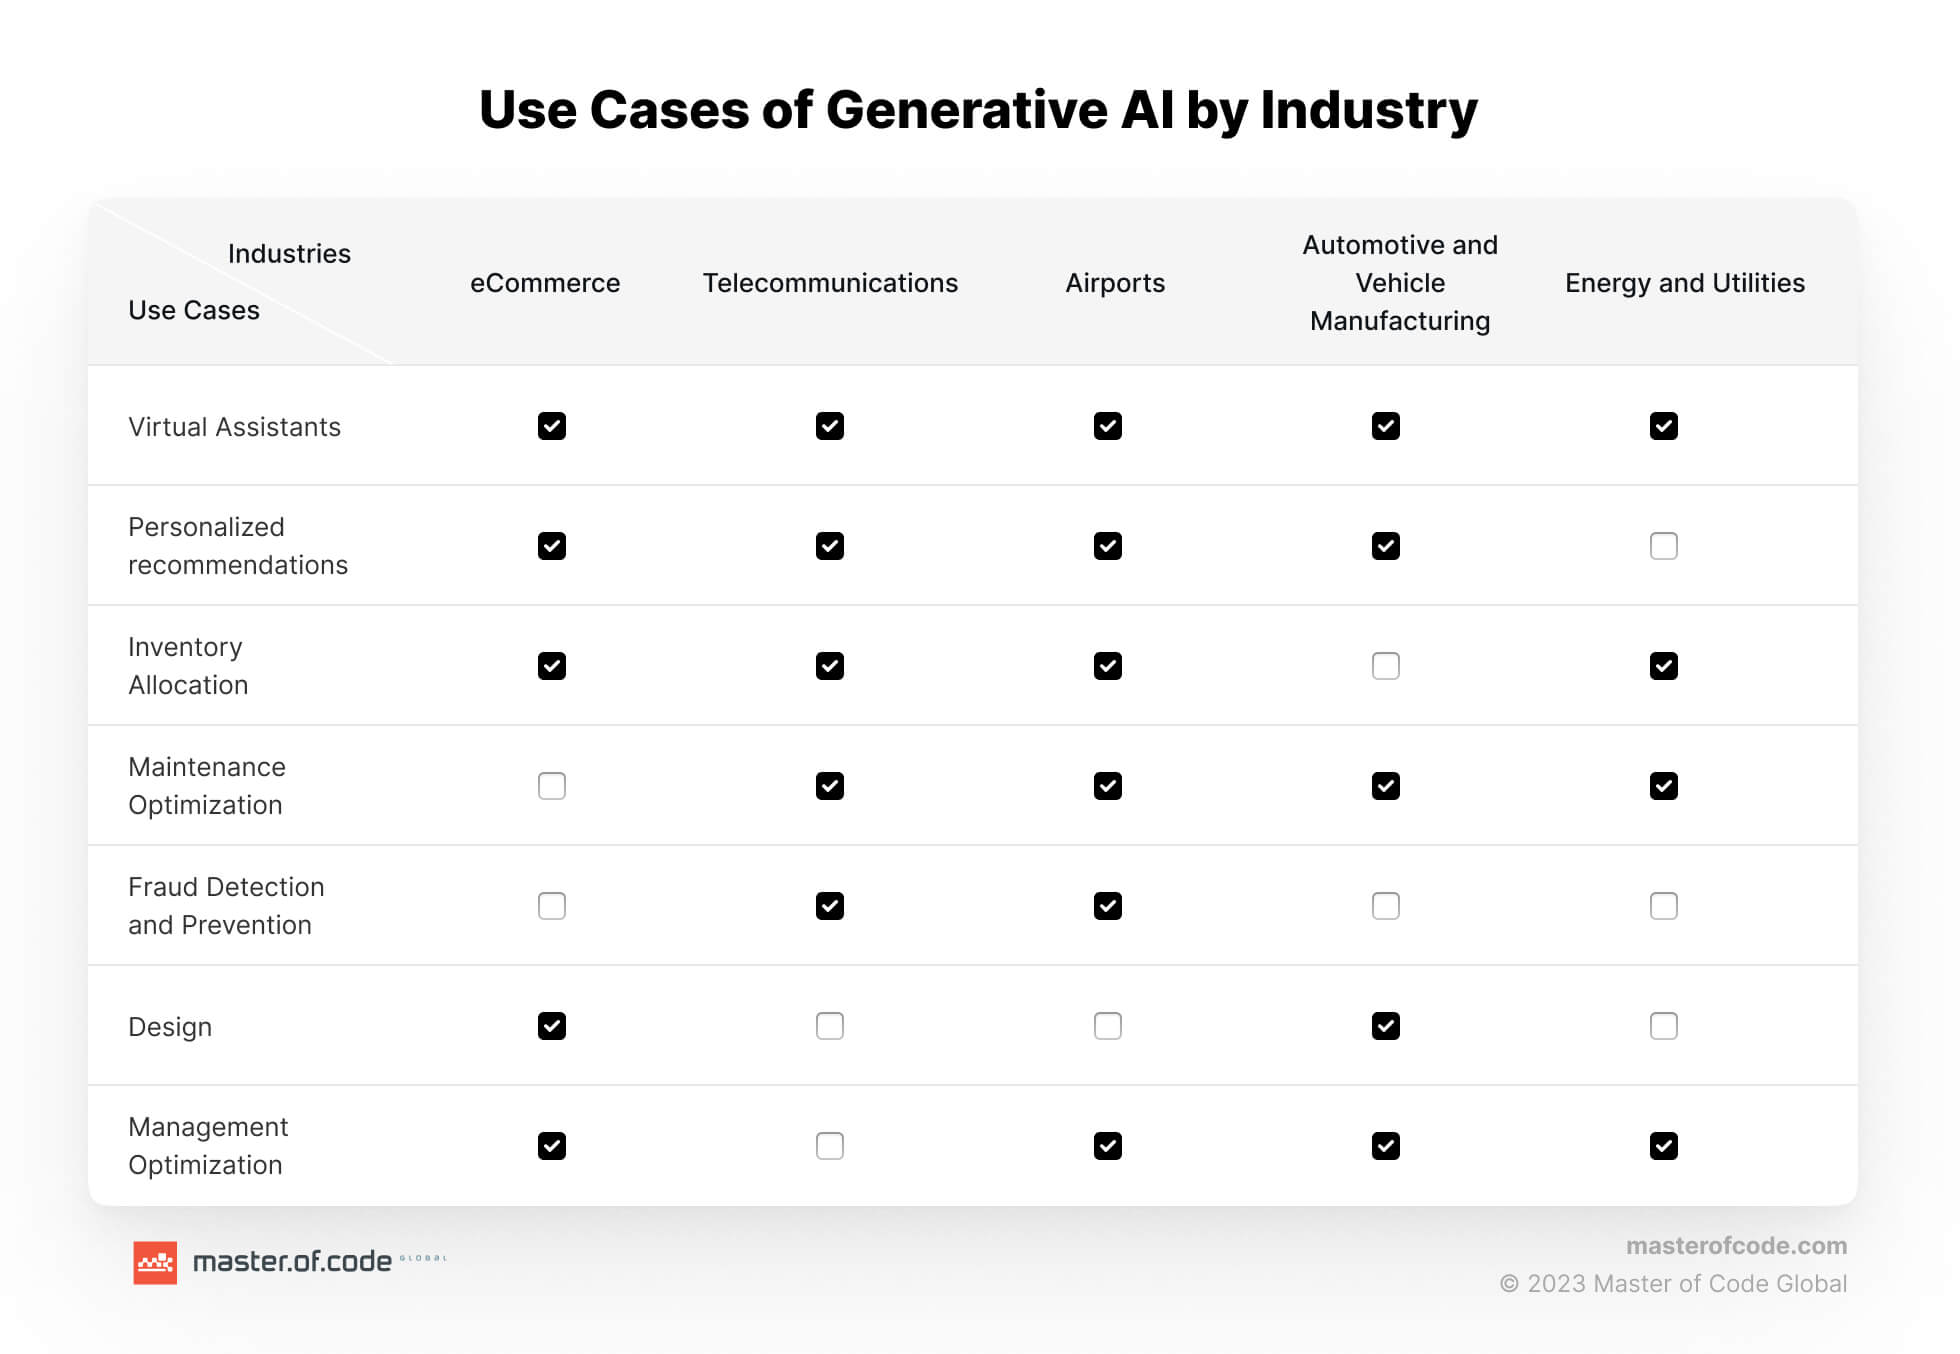 Generative AI Use Cases by Industry